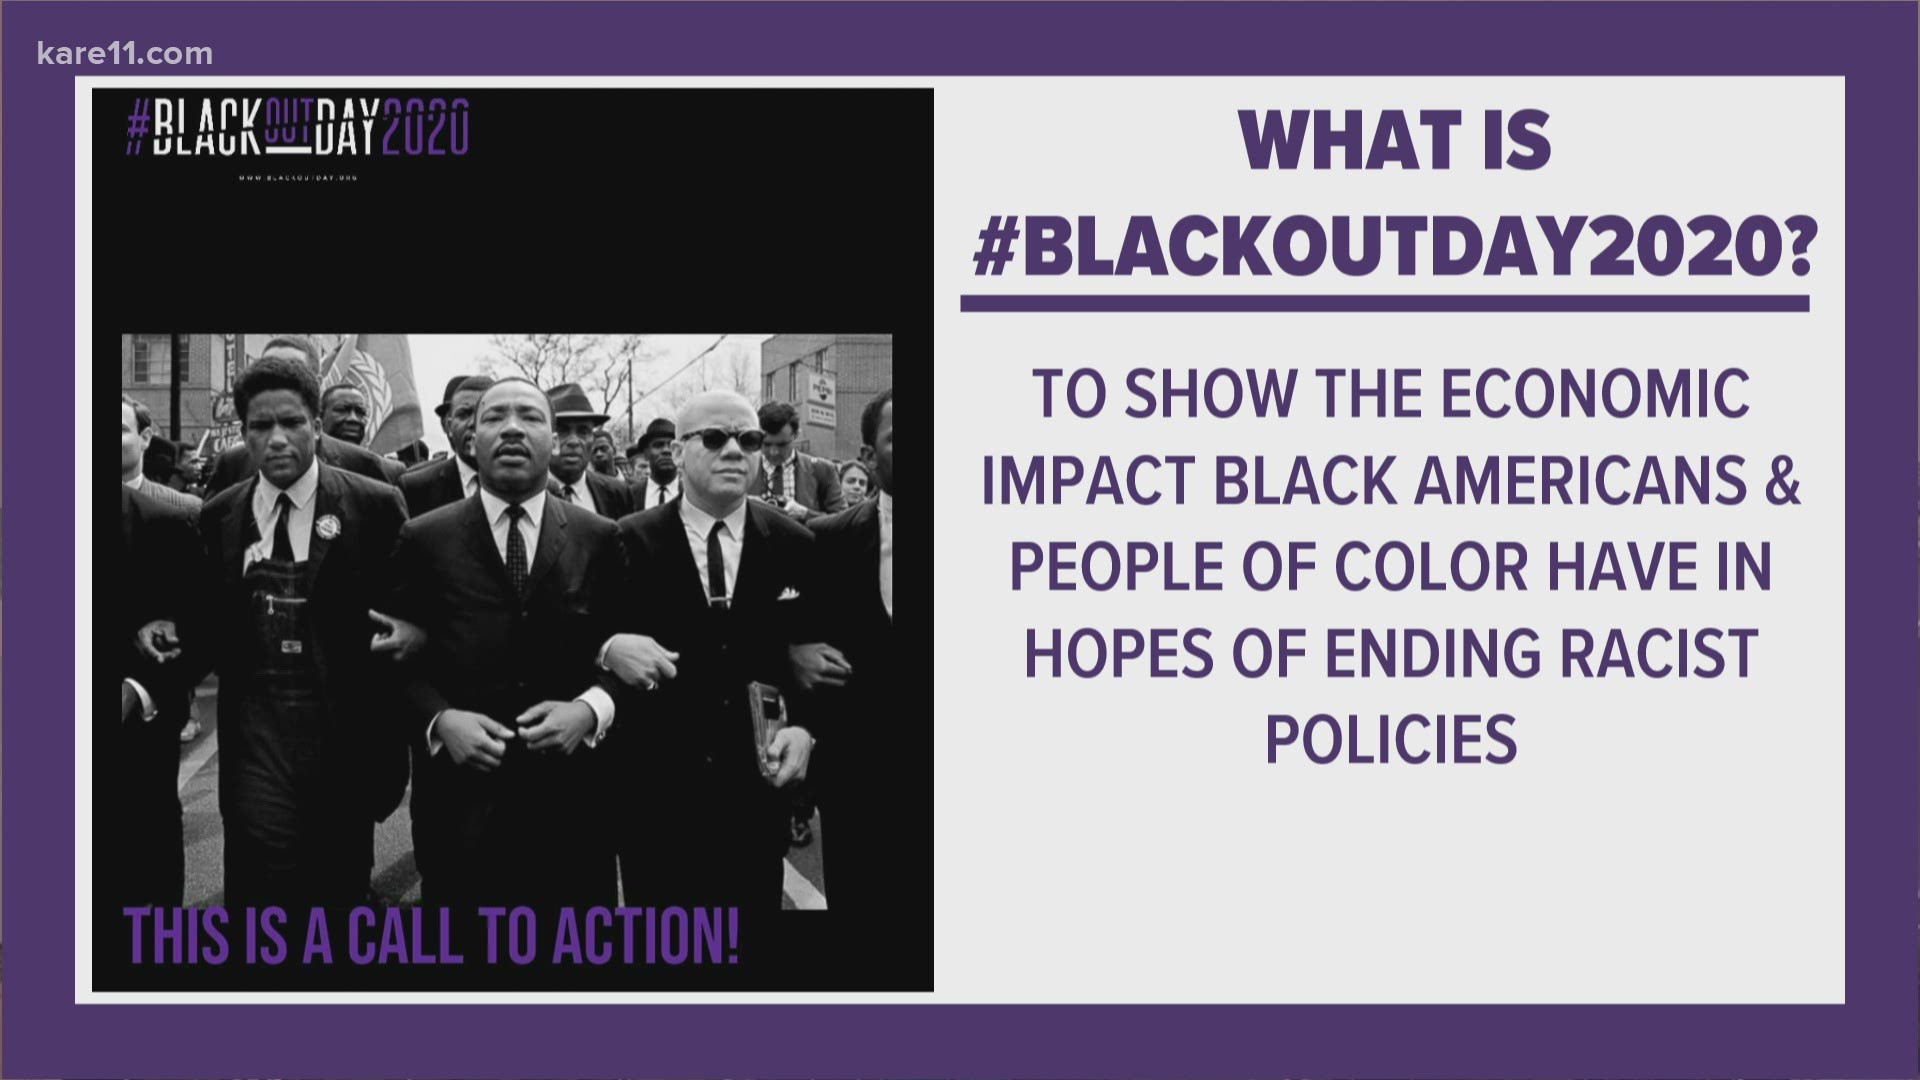 Blackout Day 2020 is meant to show the economic impact Black consumers have in America, and calls on them to only support Black-owned businesses on Tuesday.